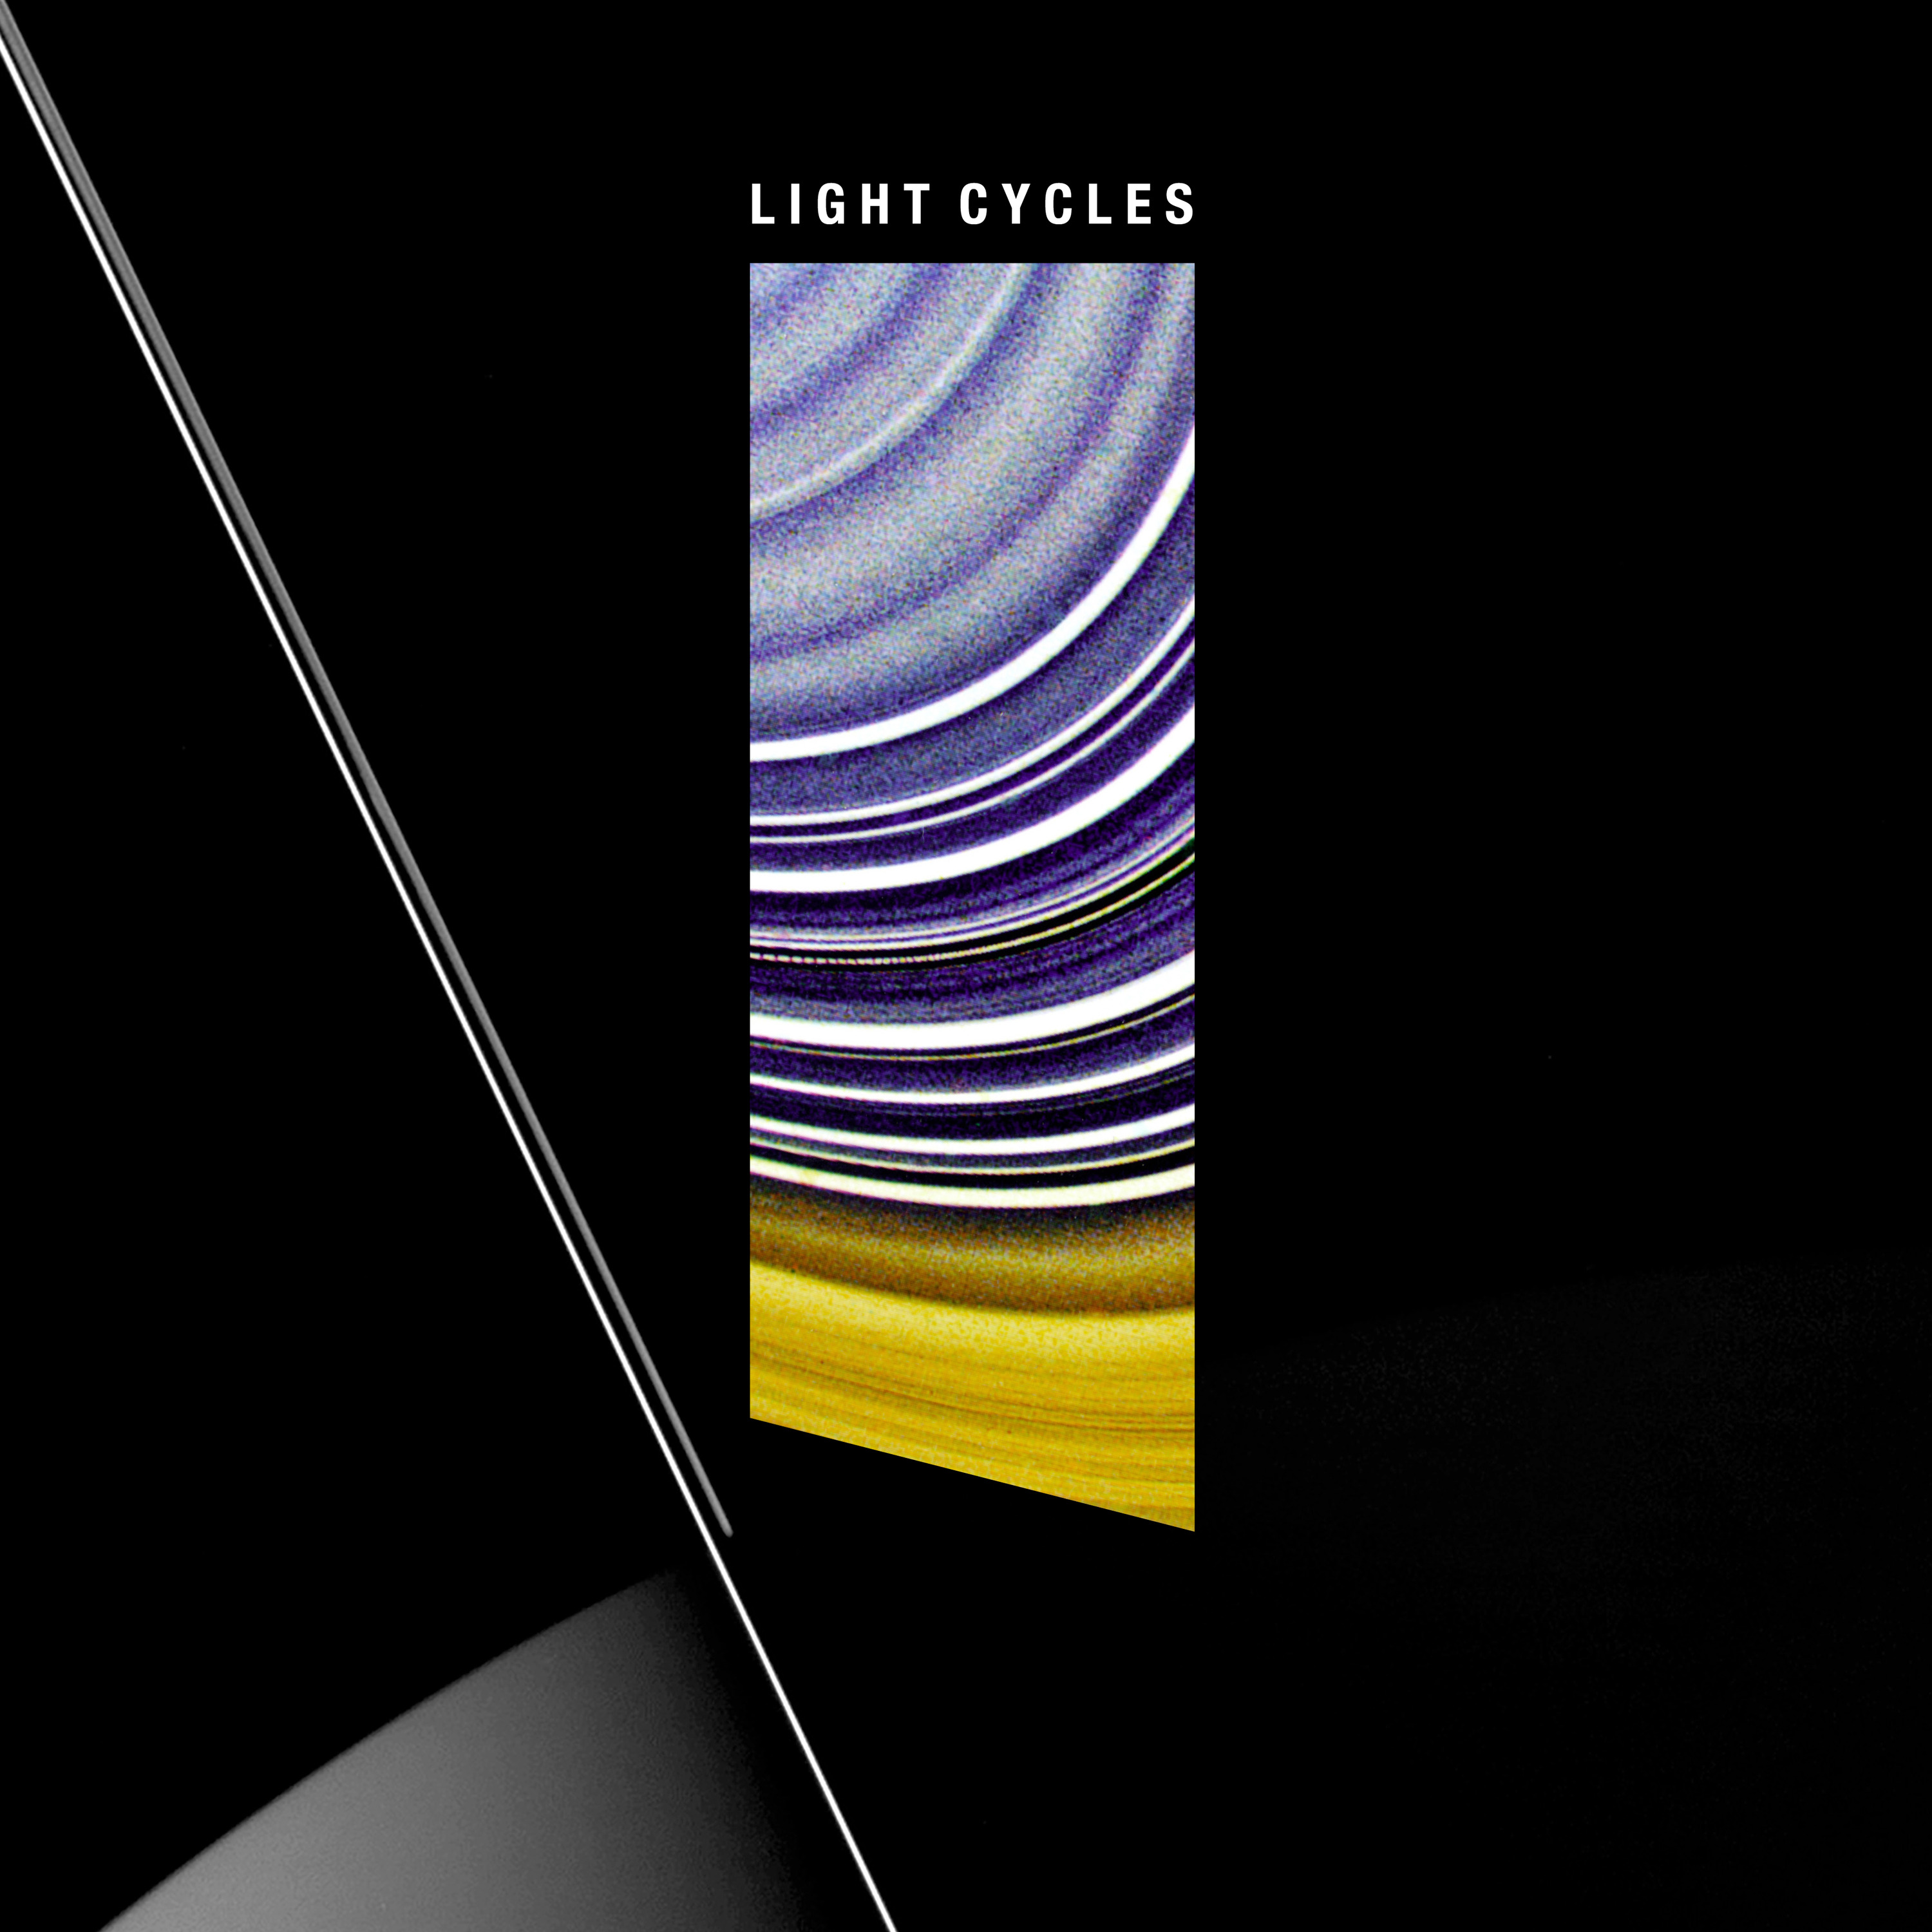 Theme from Light Cycles